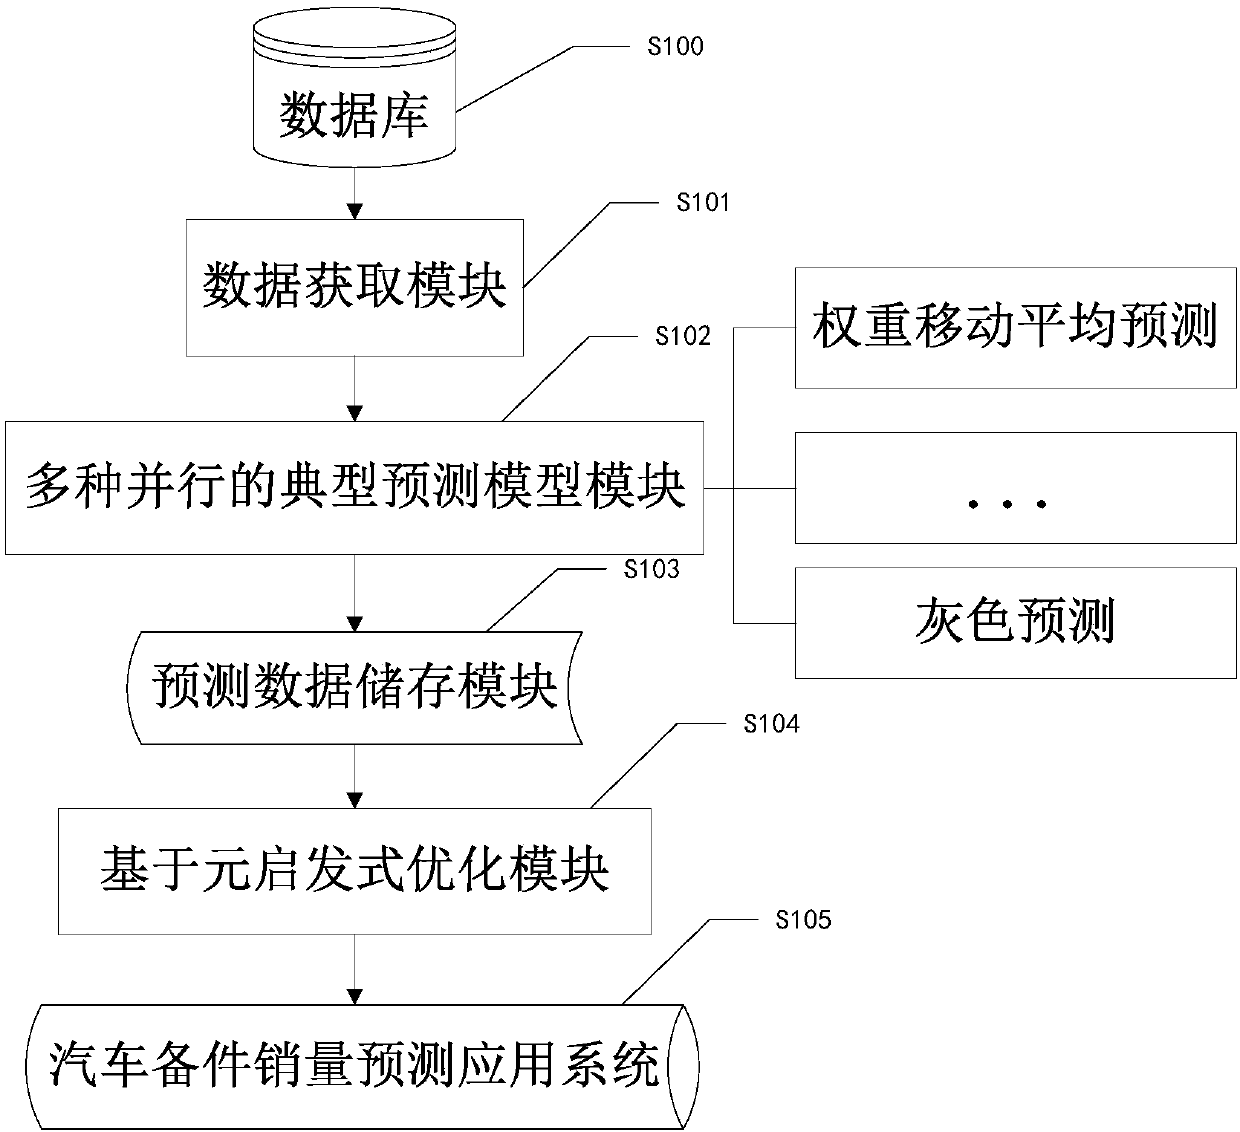 Vehicle spare part sales volume forecasting method and system based on unified dynamic integration model and meta-heuristic algorithm